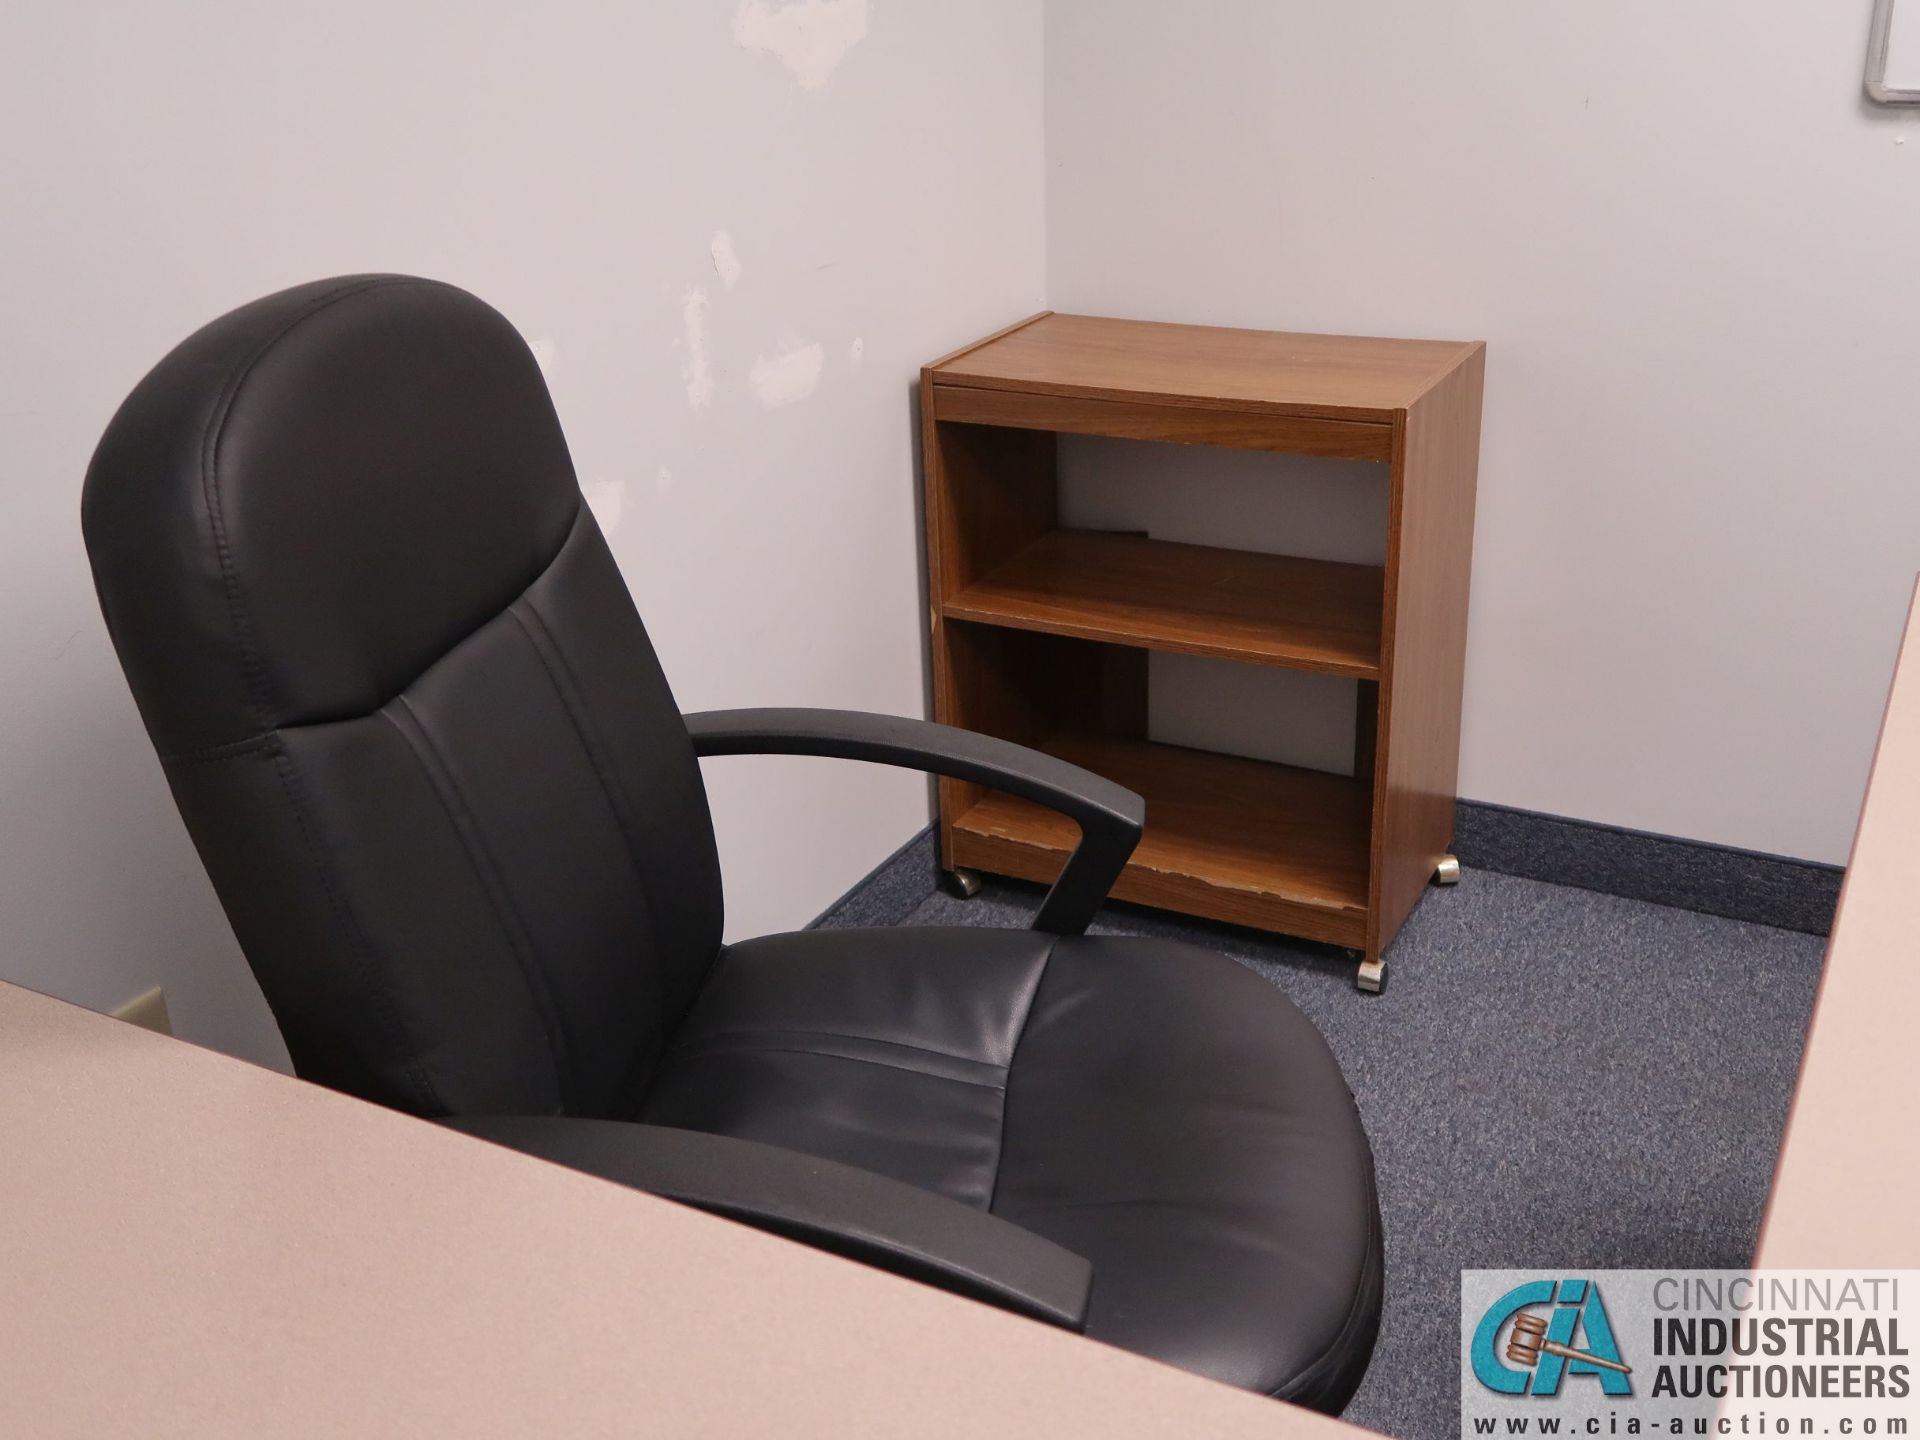 (LOT) L-SHAPED MODULAR DESK WITH CHAIR, BOOKCASE, AND FILING CABINETS ** NO DRY ERASE BOARD ** - Image 3 of 3